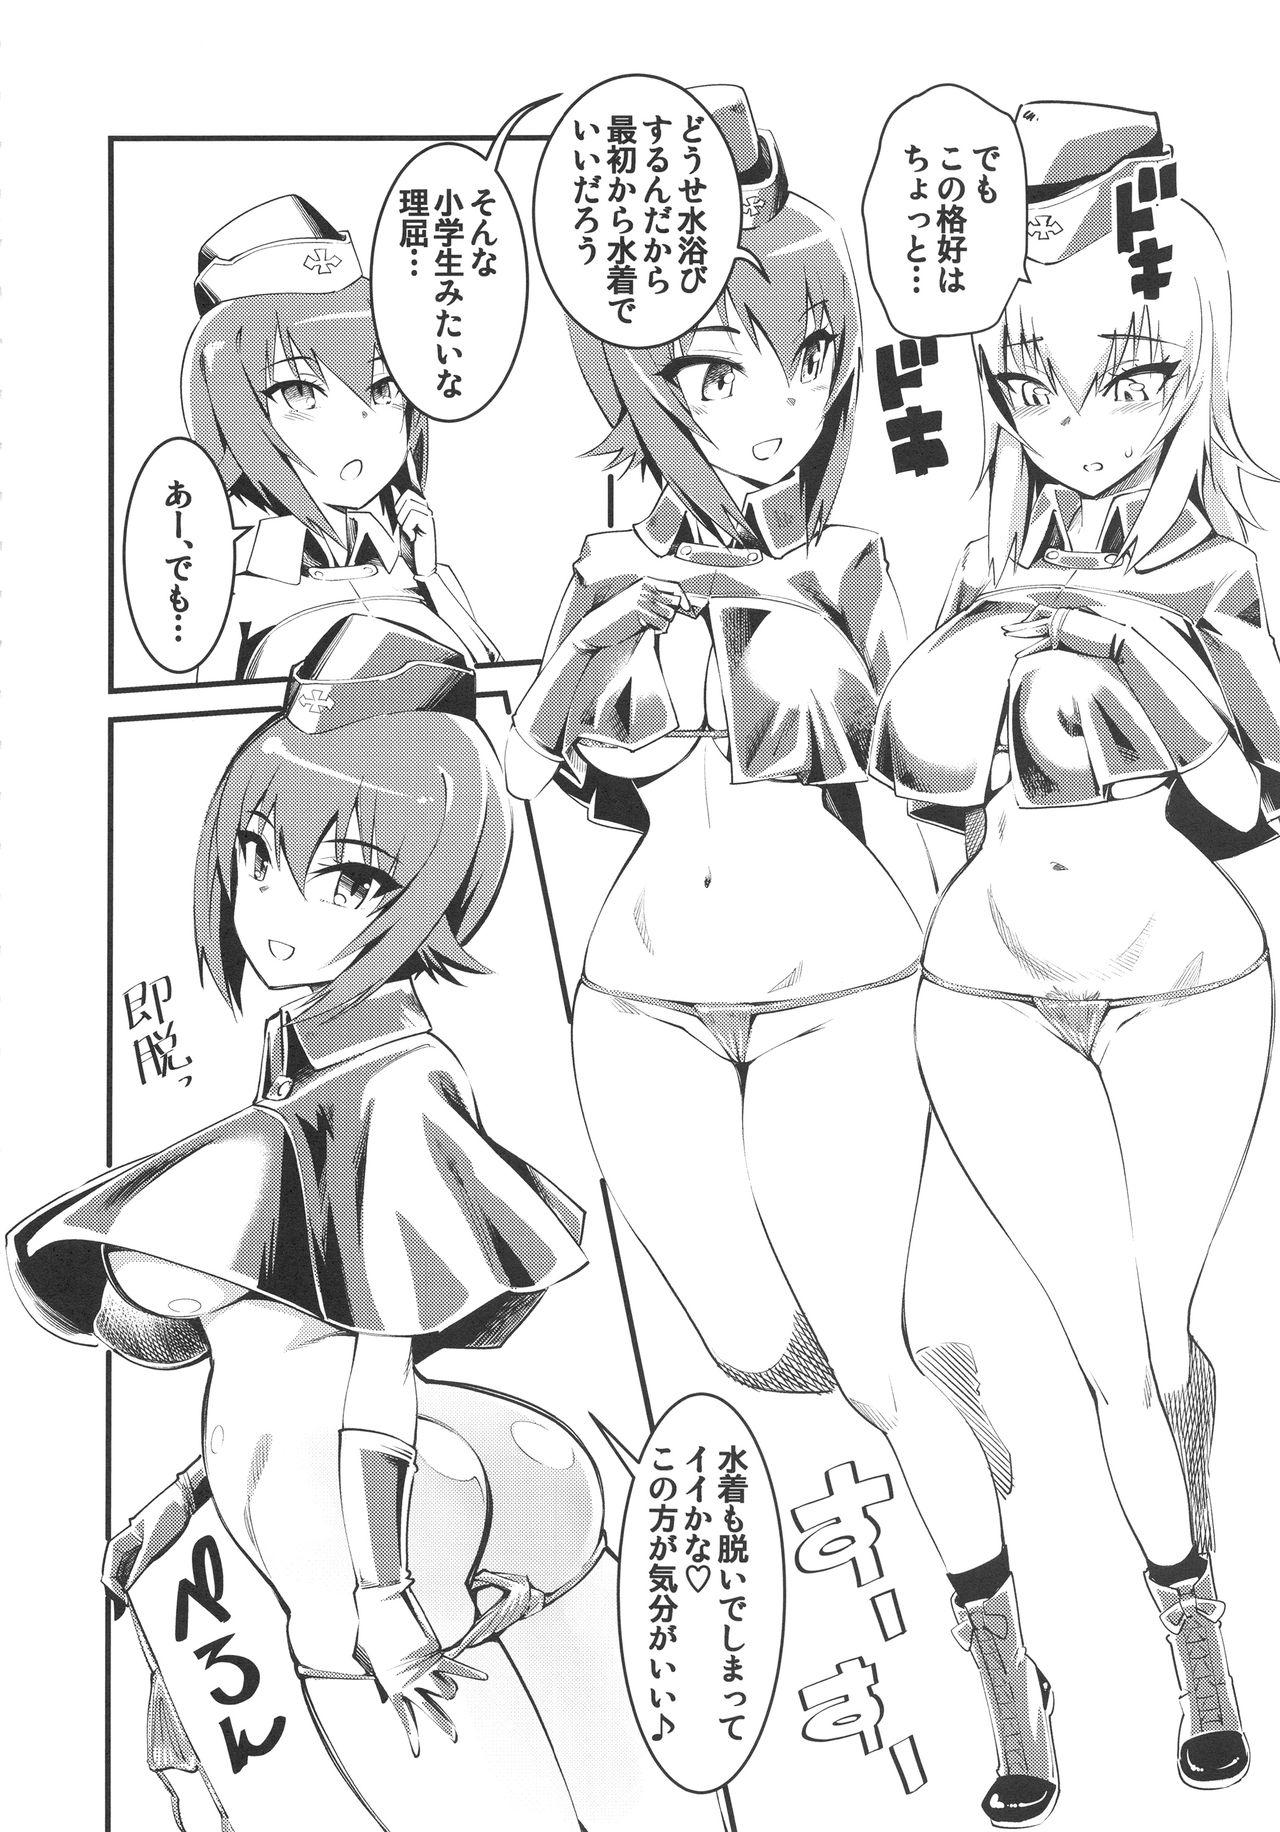 Gloryholes GIRLS and CAMPER and NUDIST - Girls und panzer Pure 18 - Page 3